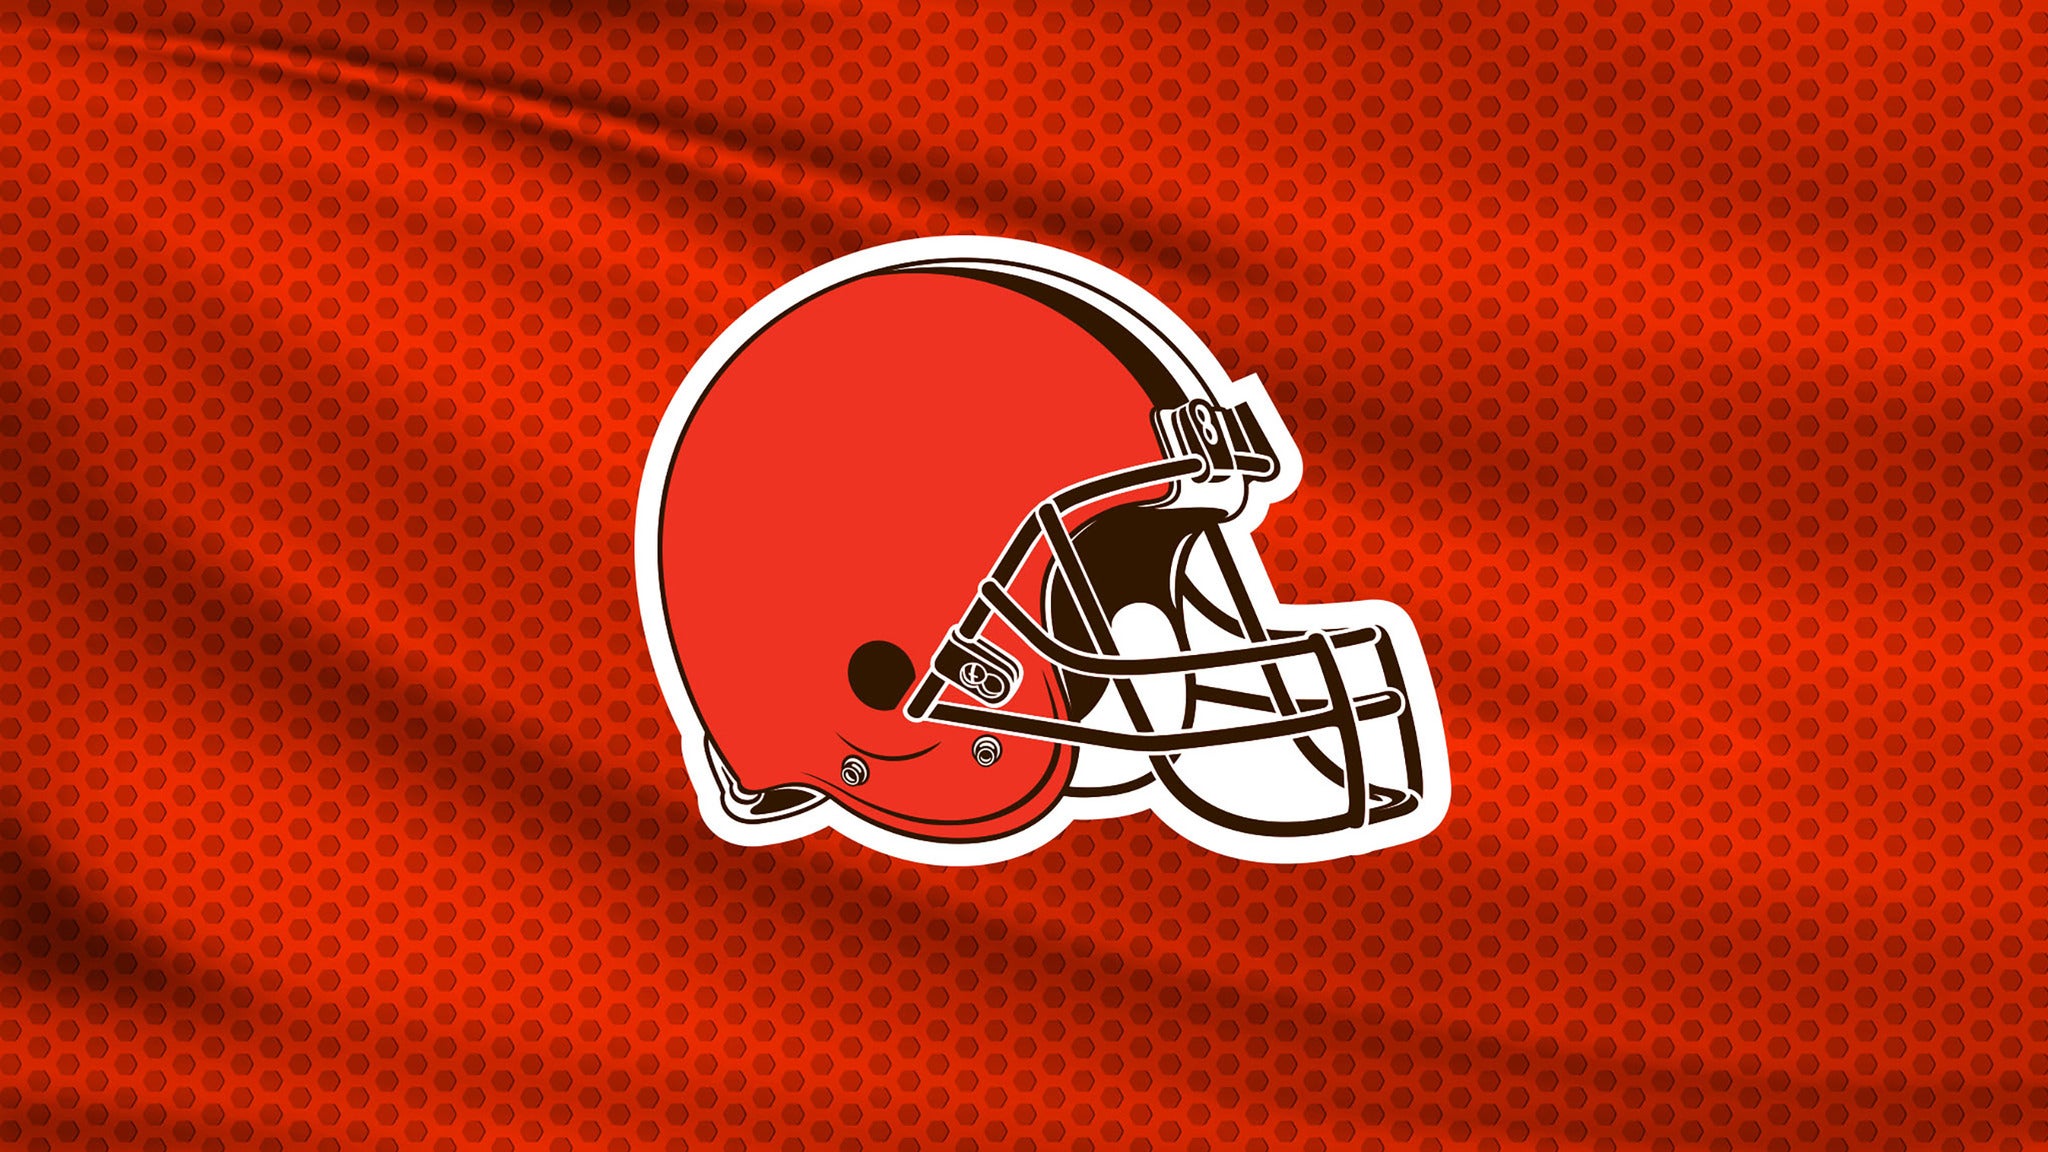 cleveland browns football tickets